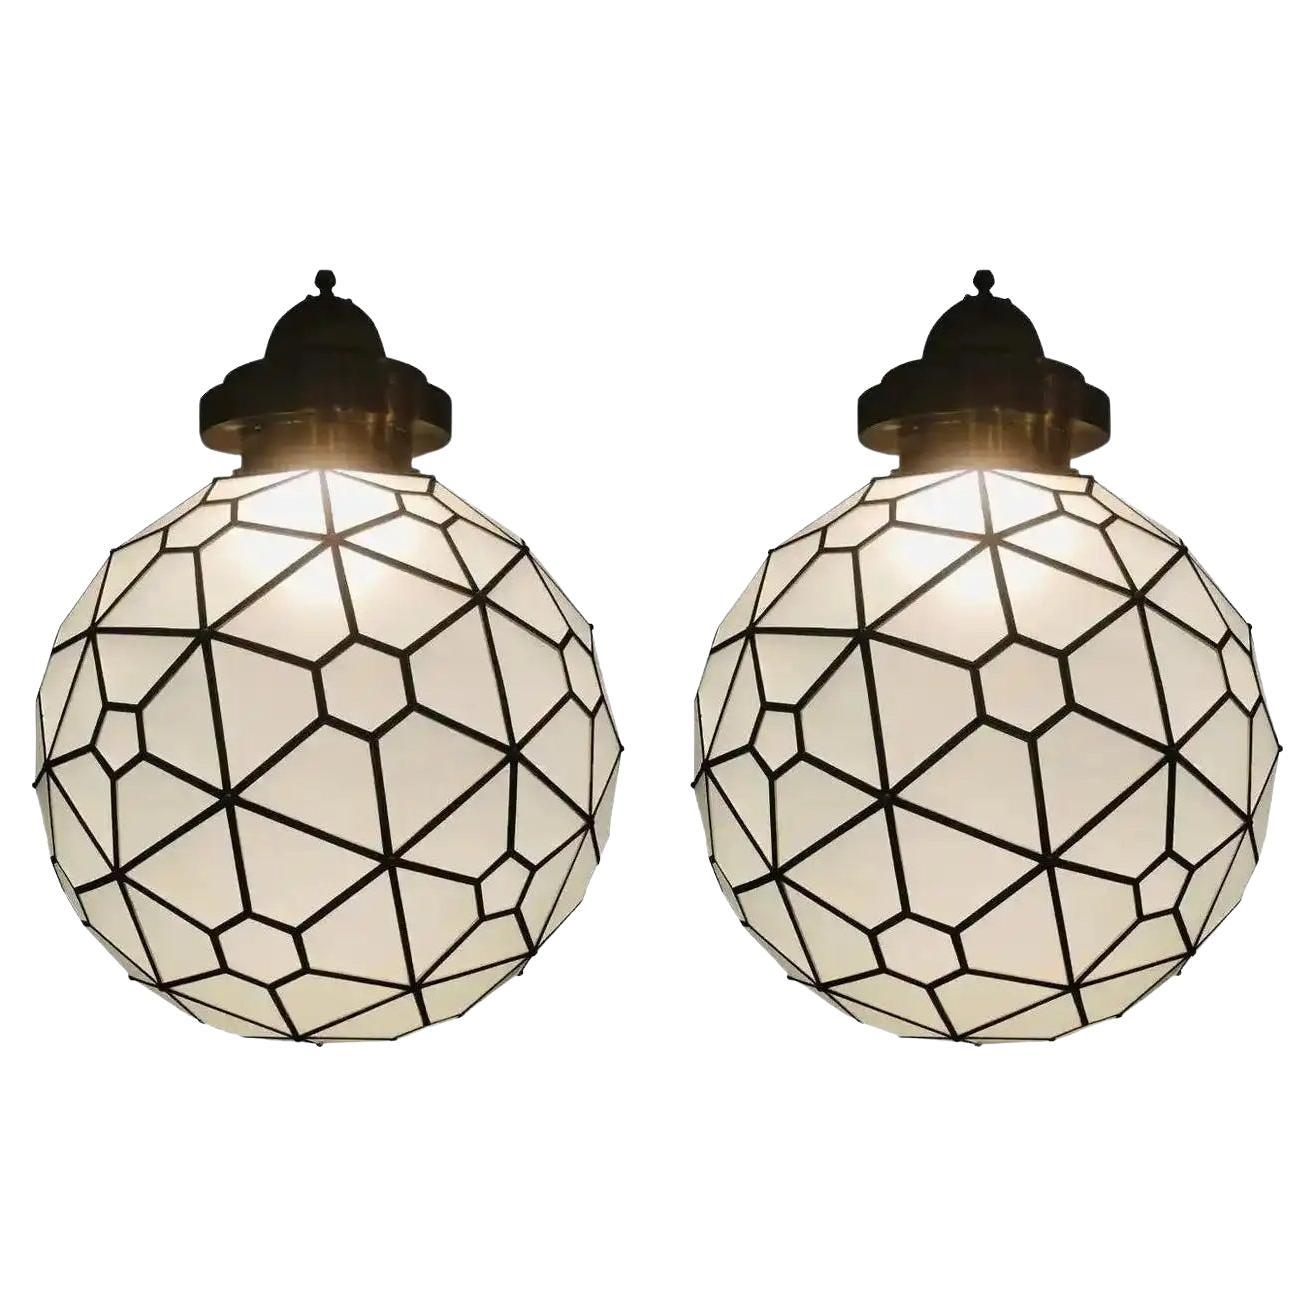 An exceptional and stunning pair of Art Deco style milk glass round shape chandeliers or pendants with brass inlay and handcrafted with a filigree design canopy. These fine custom lanterns or pendants are rare and very chic. They will elevate the